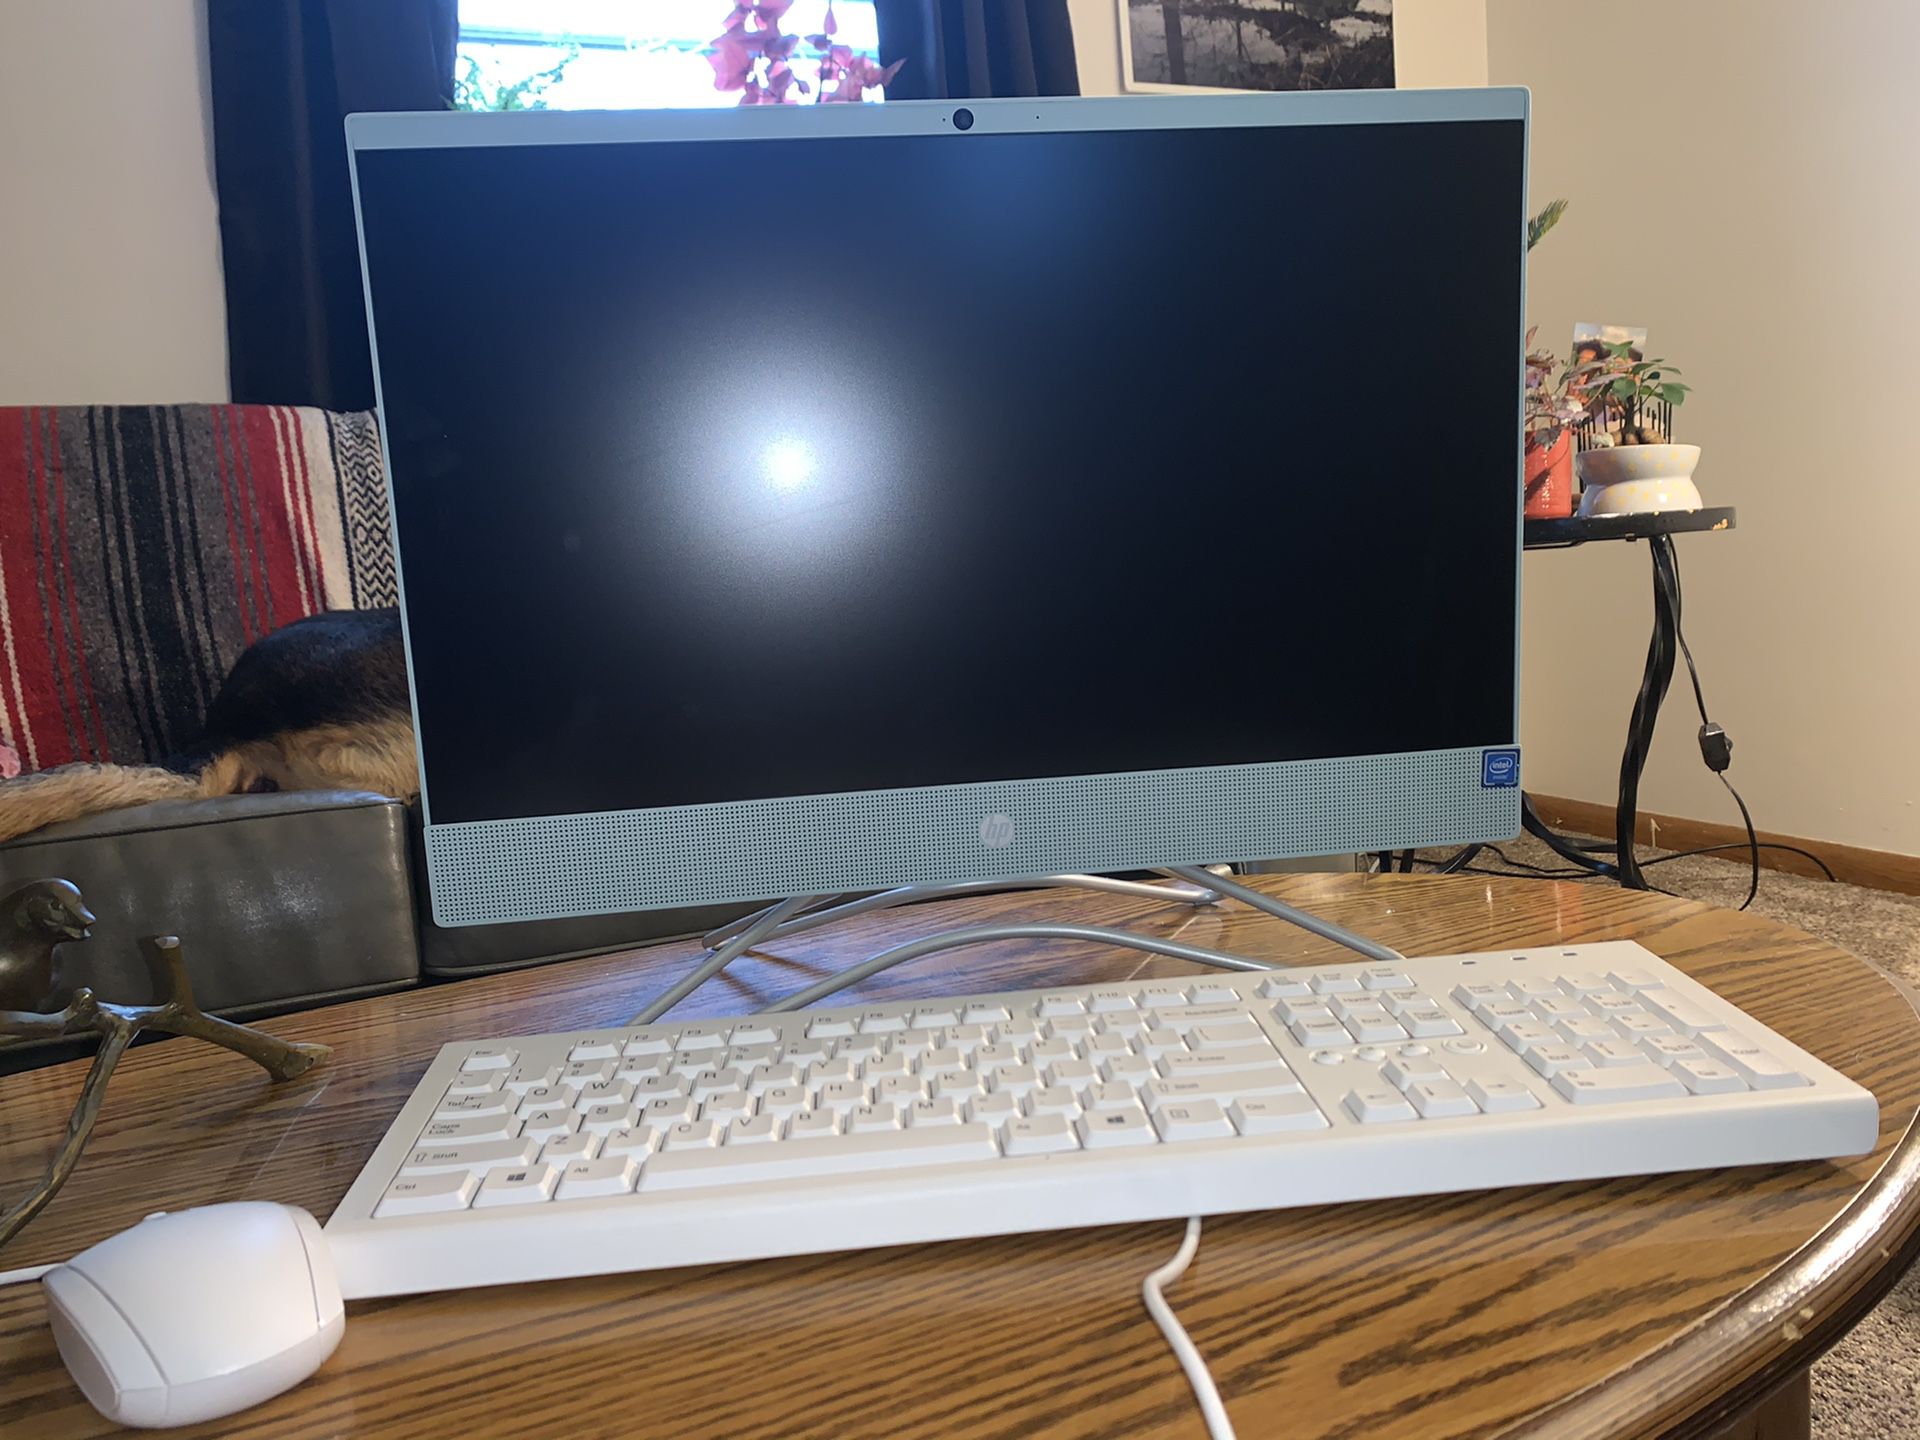 BRAND NEW HP Desktop Computer (BARELY USED)